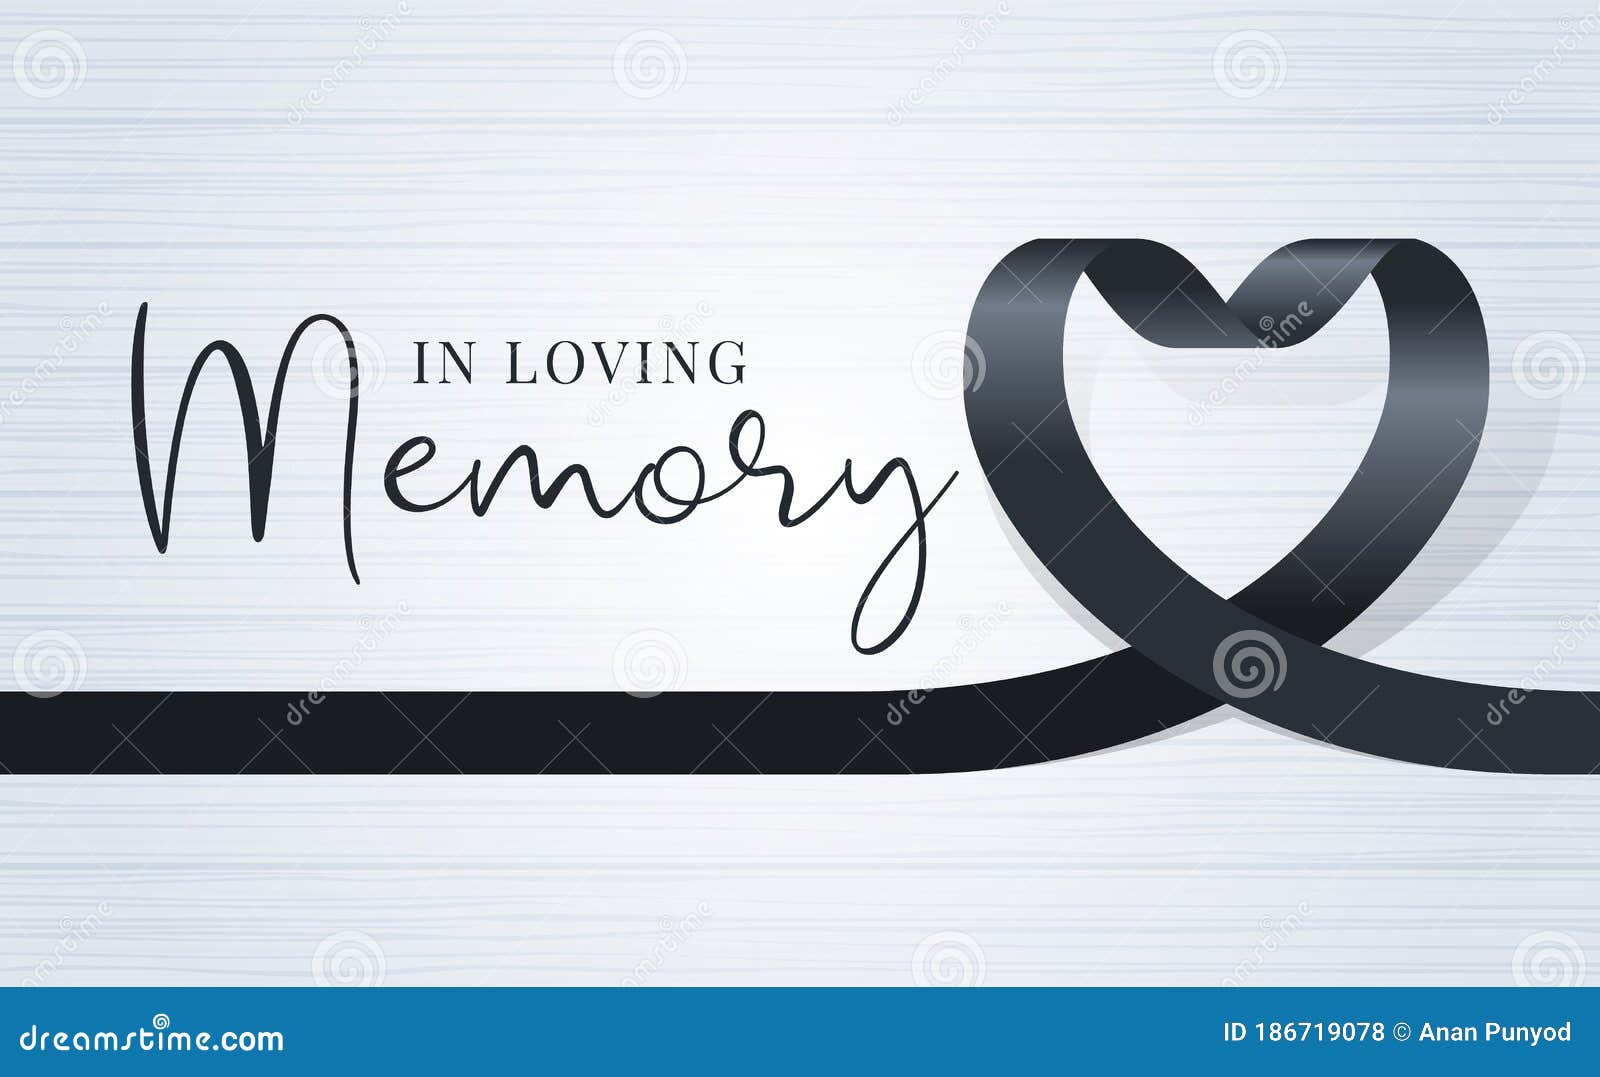 In Loving Memory Text and Black Heart Ribbon Sign on Soft Light Wood